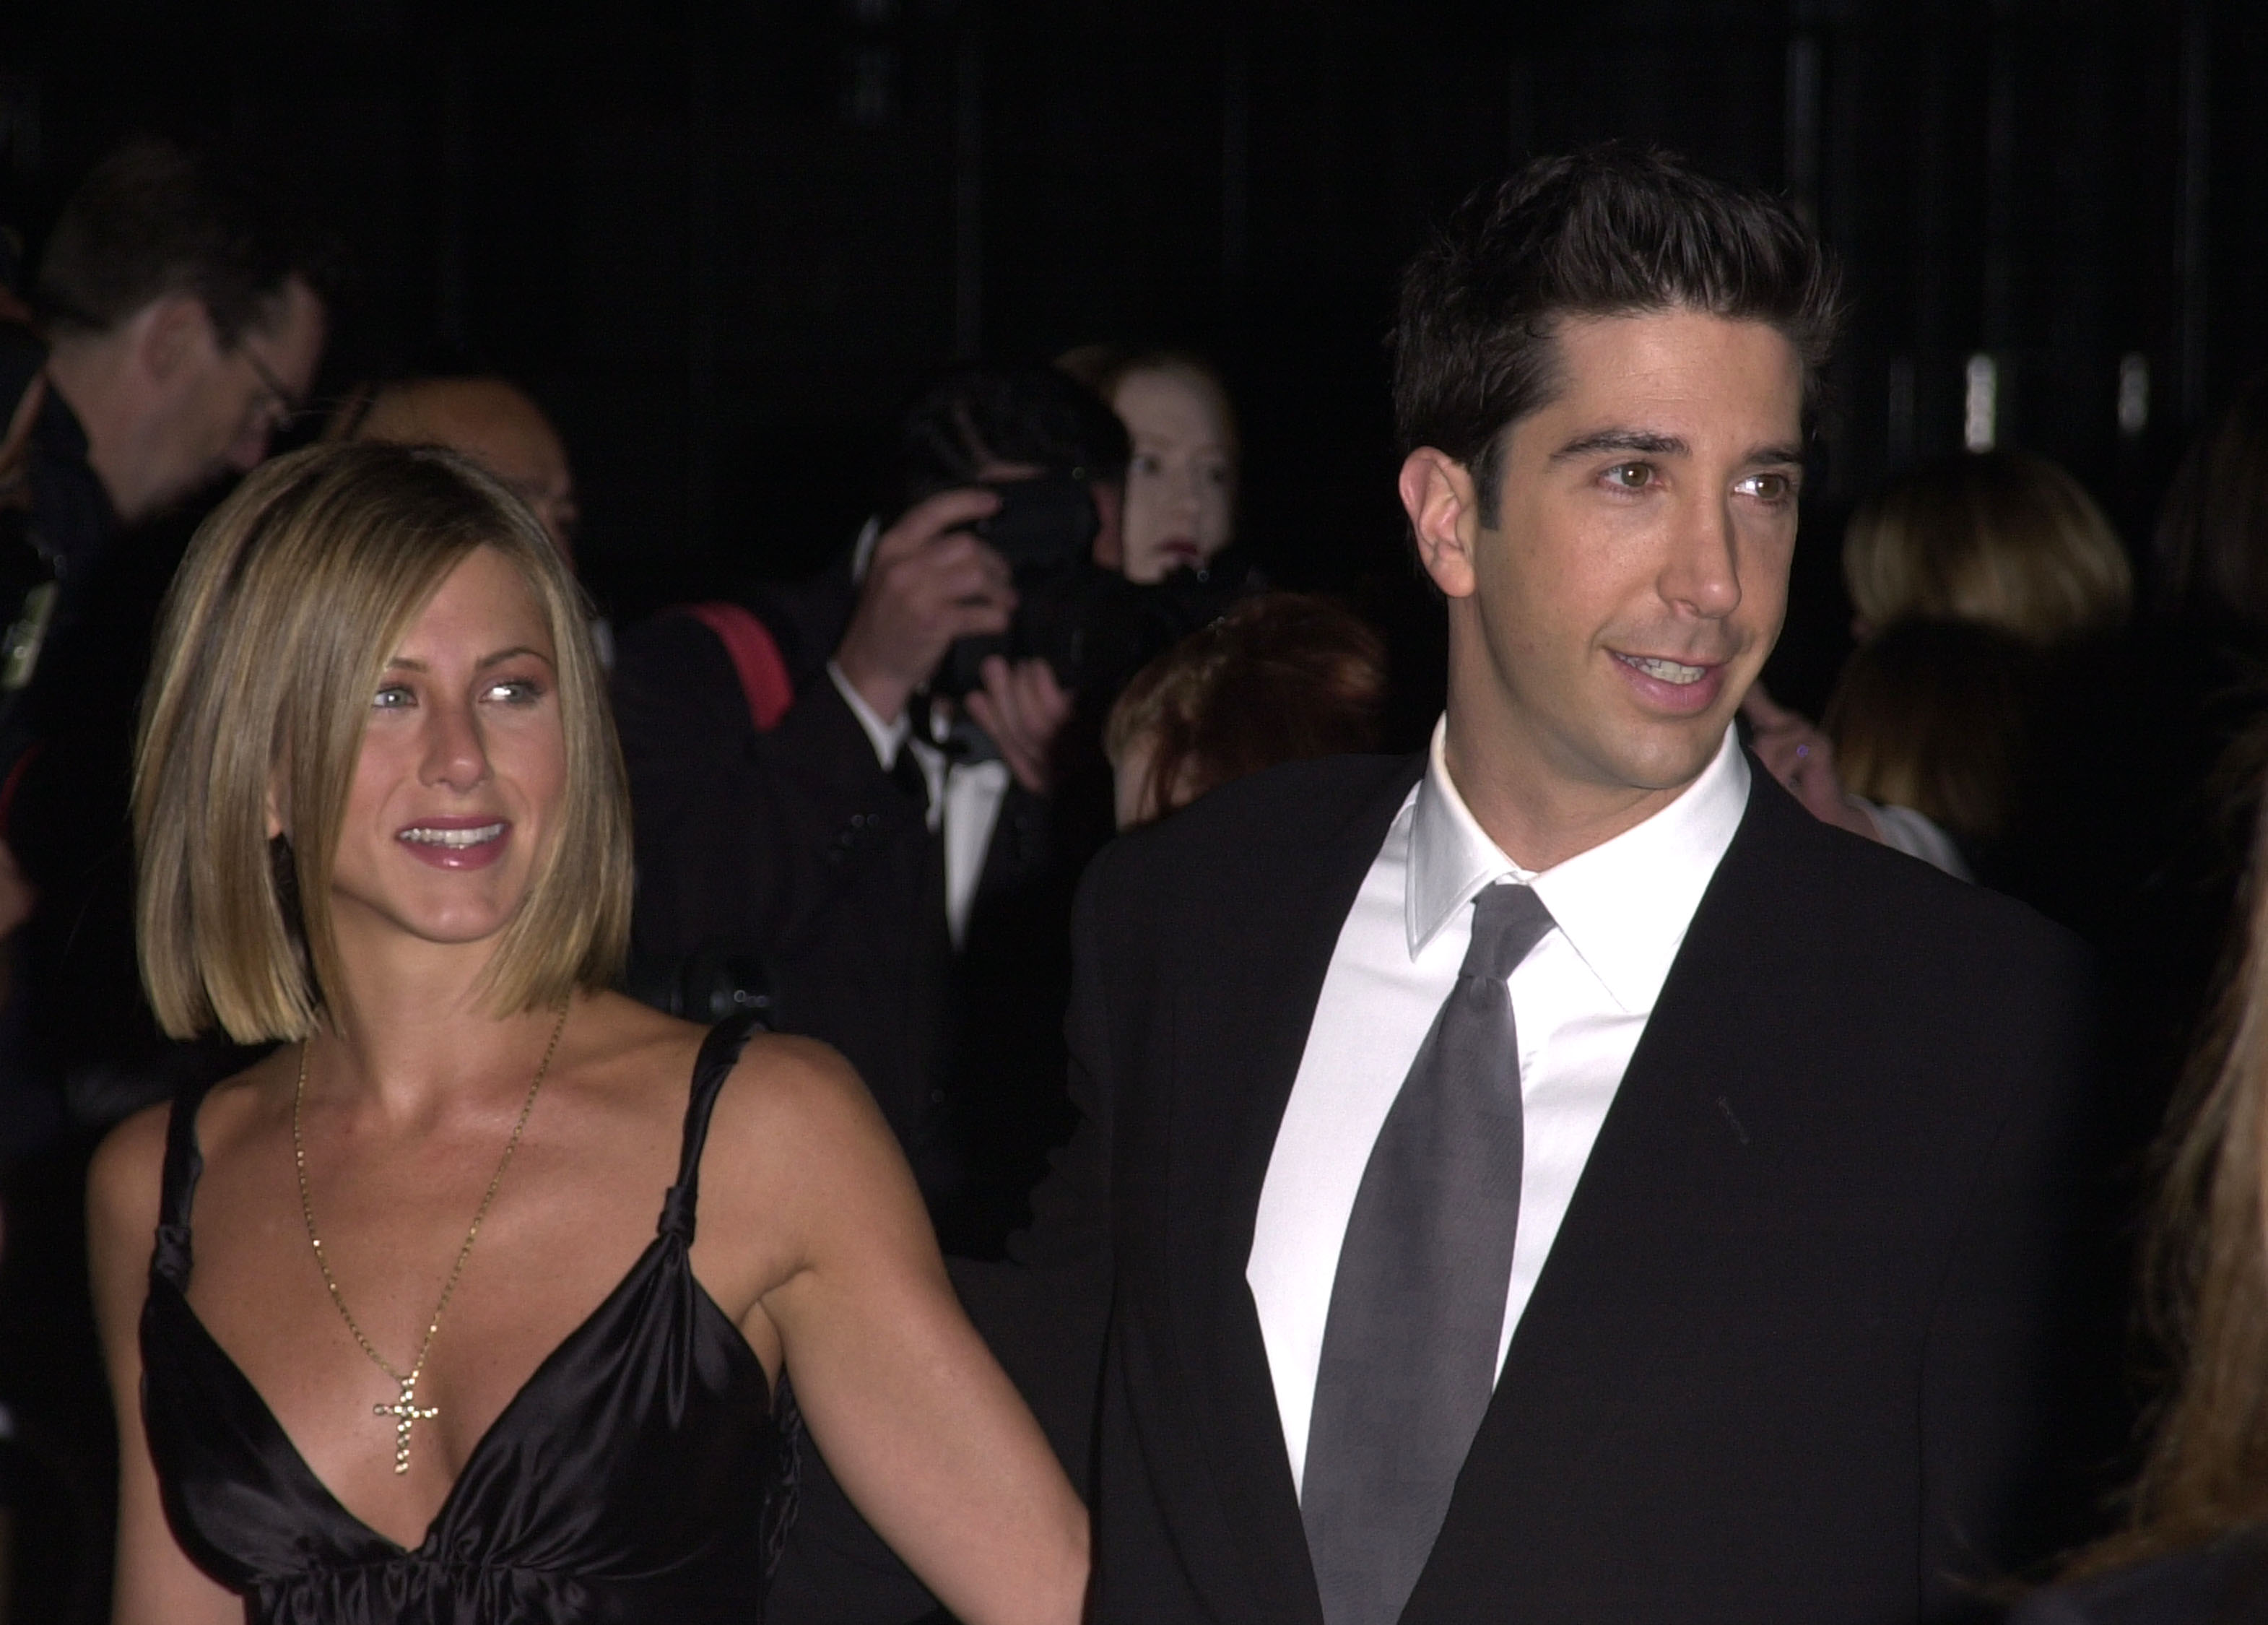 Jennifer Aniston and David Schwimmer attend the People's Choice Awards together